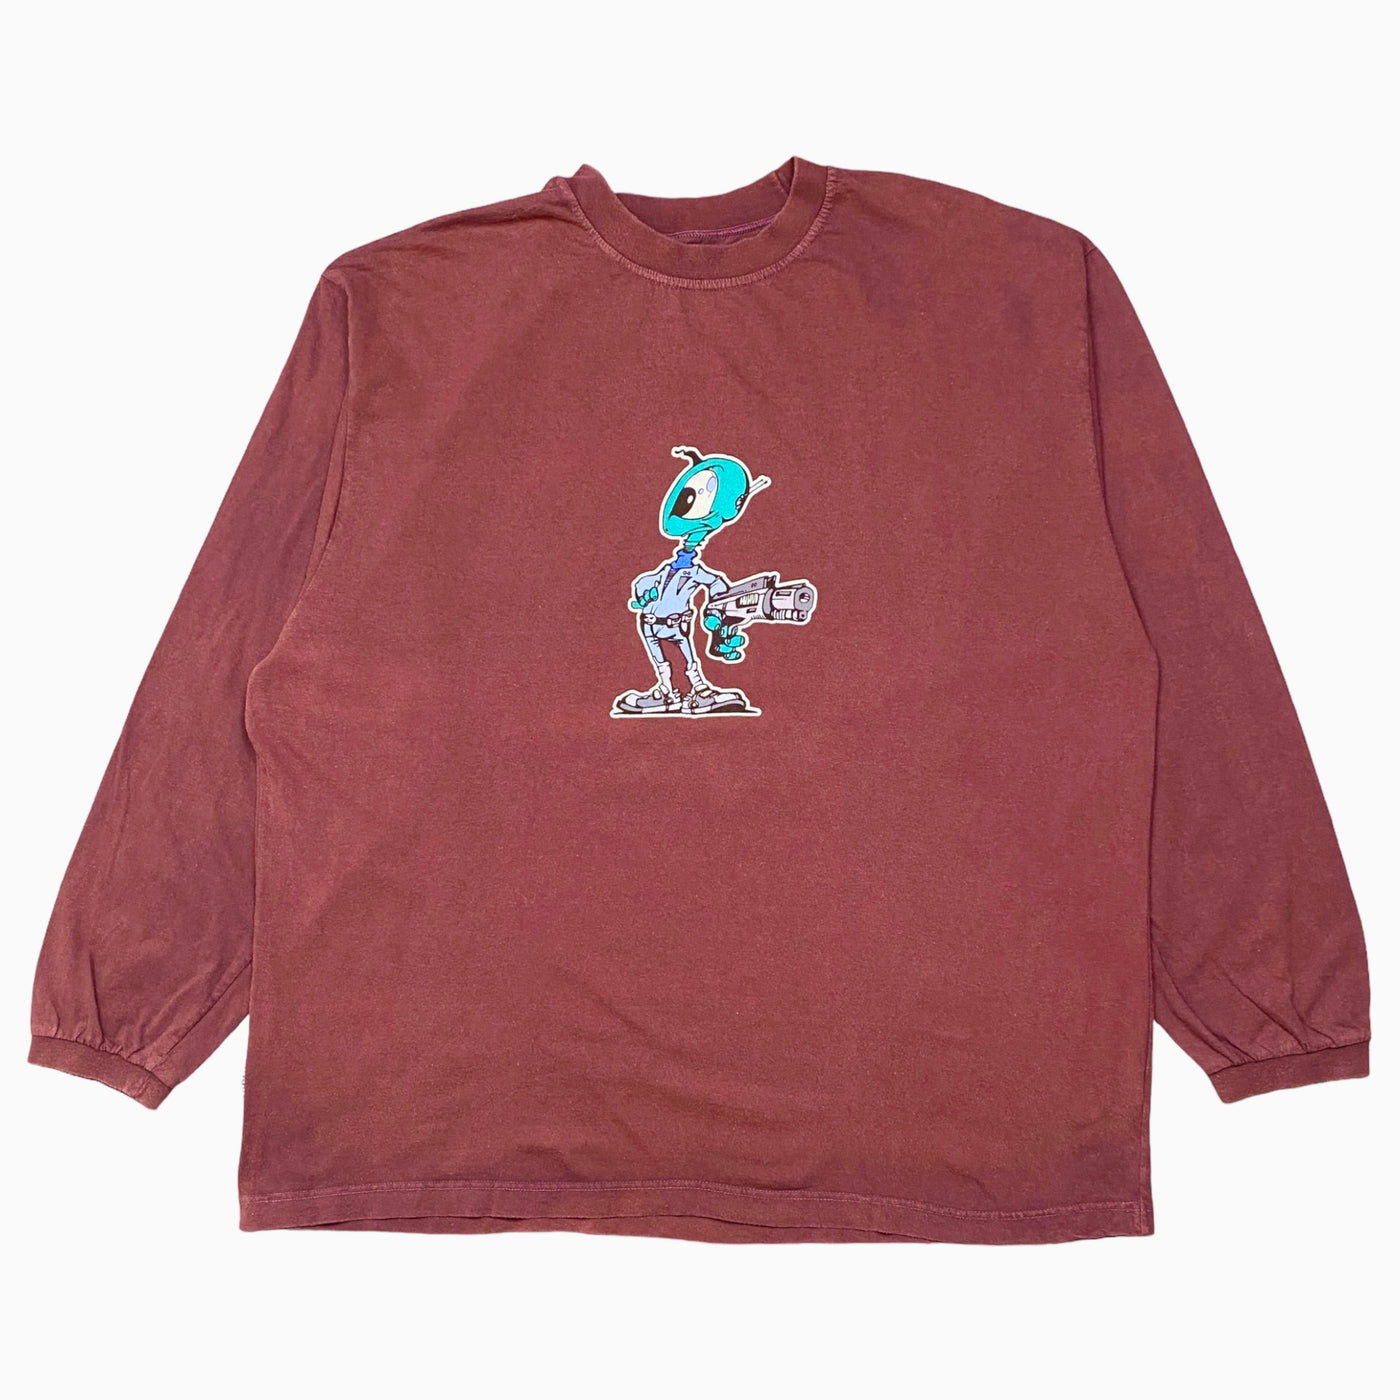 LATE 90S HOMEBOY LONG SLEEVE